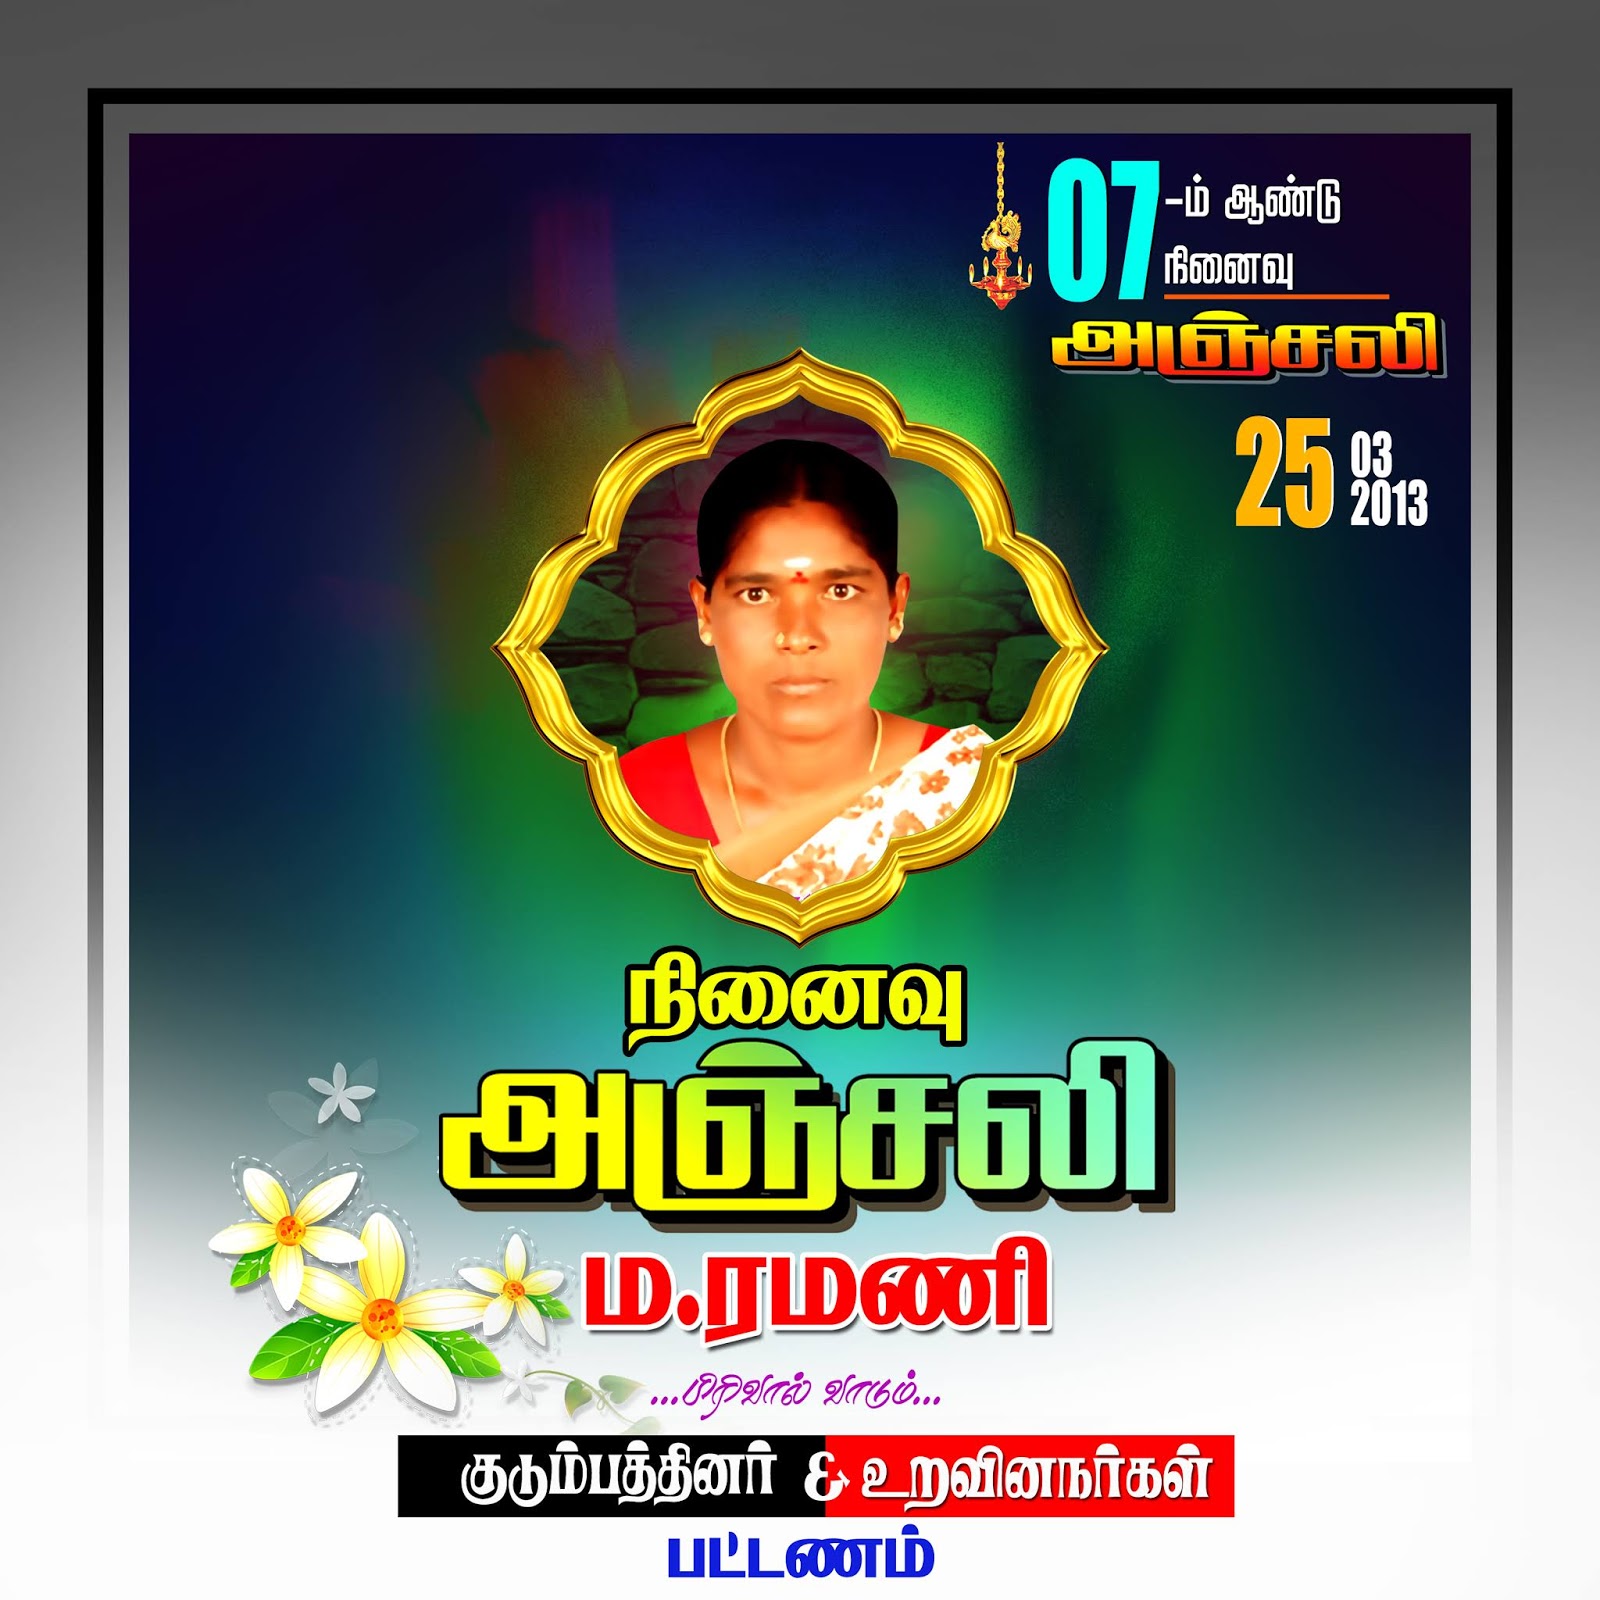 Kumaran Network Death Flex If you like, you can download pictures in icon format or directly in png image format. kumaran network death flex